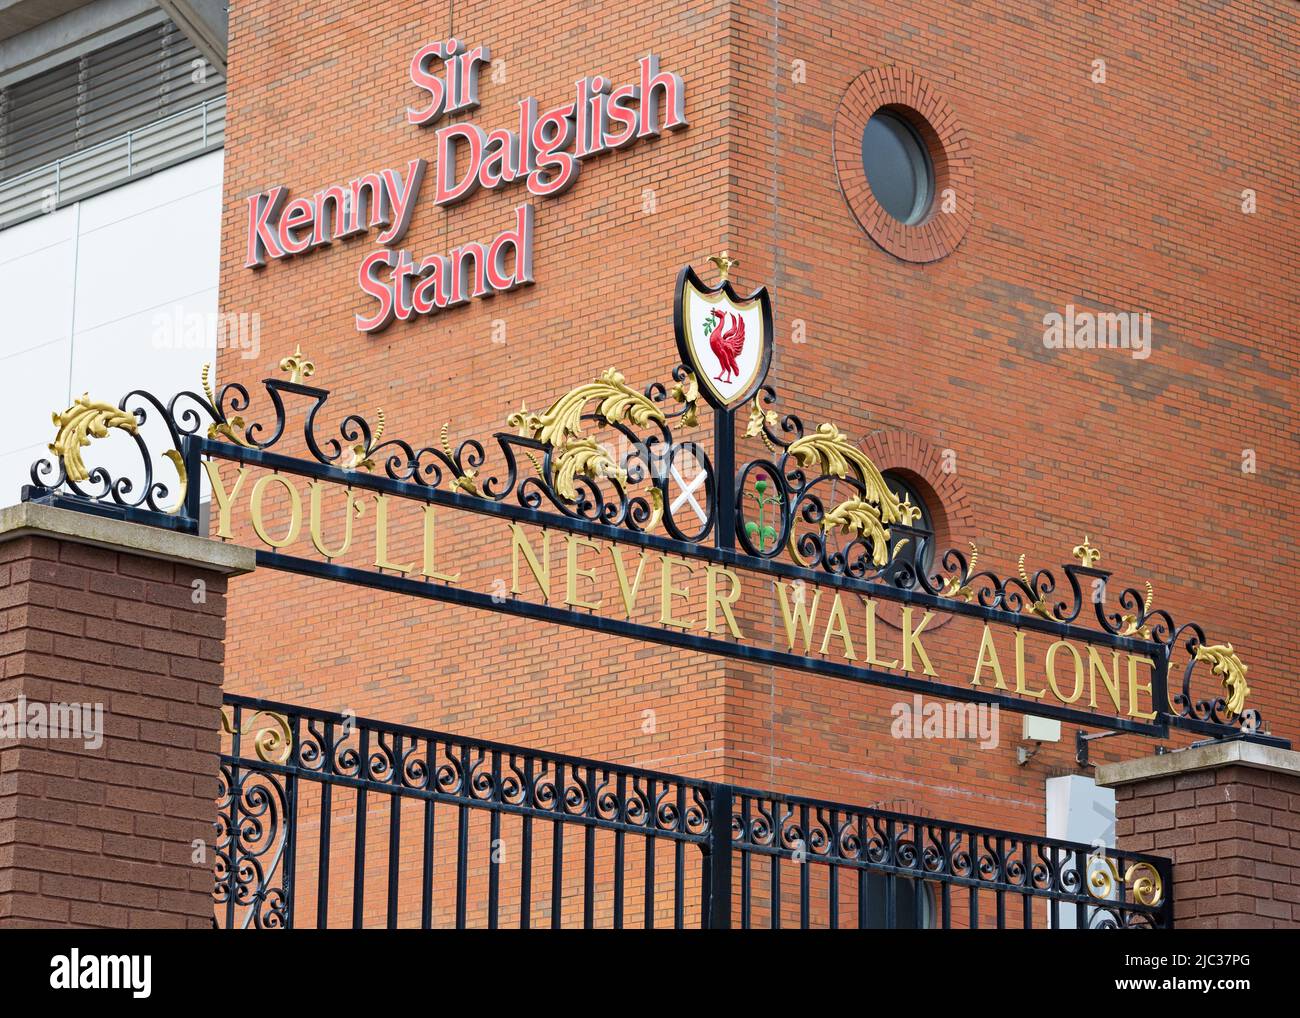 You’ll Never Walk Alone, Shankly Gates, Liverpool FC, Anfield Stadium, Liverpool, England, UK Stock Photo